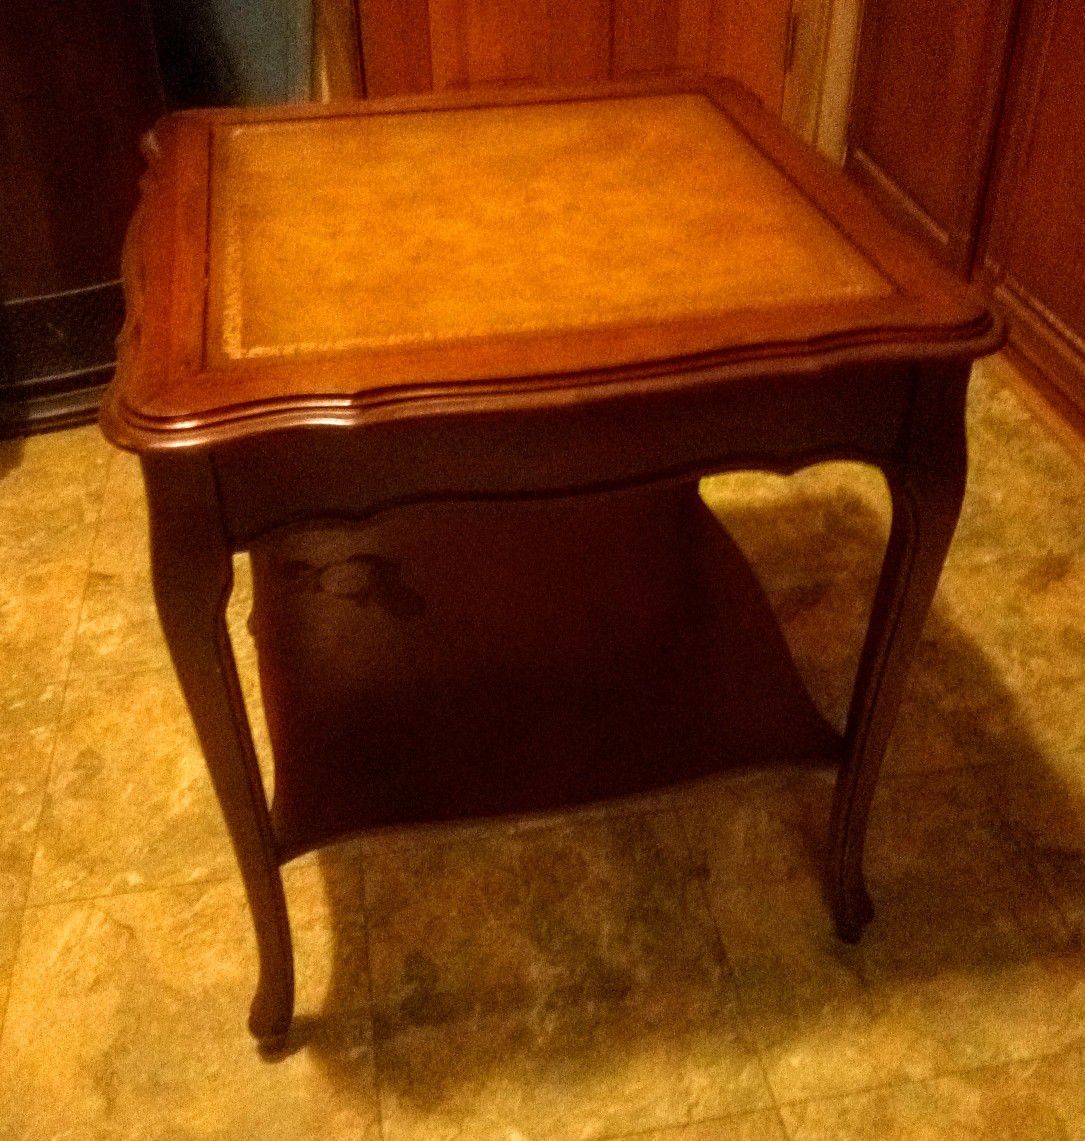 ANTIQUE MID CENTURY MODERN LEATHER CARVED WOOD END TABLE